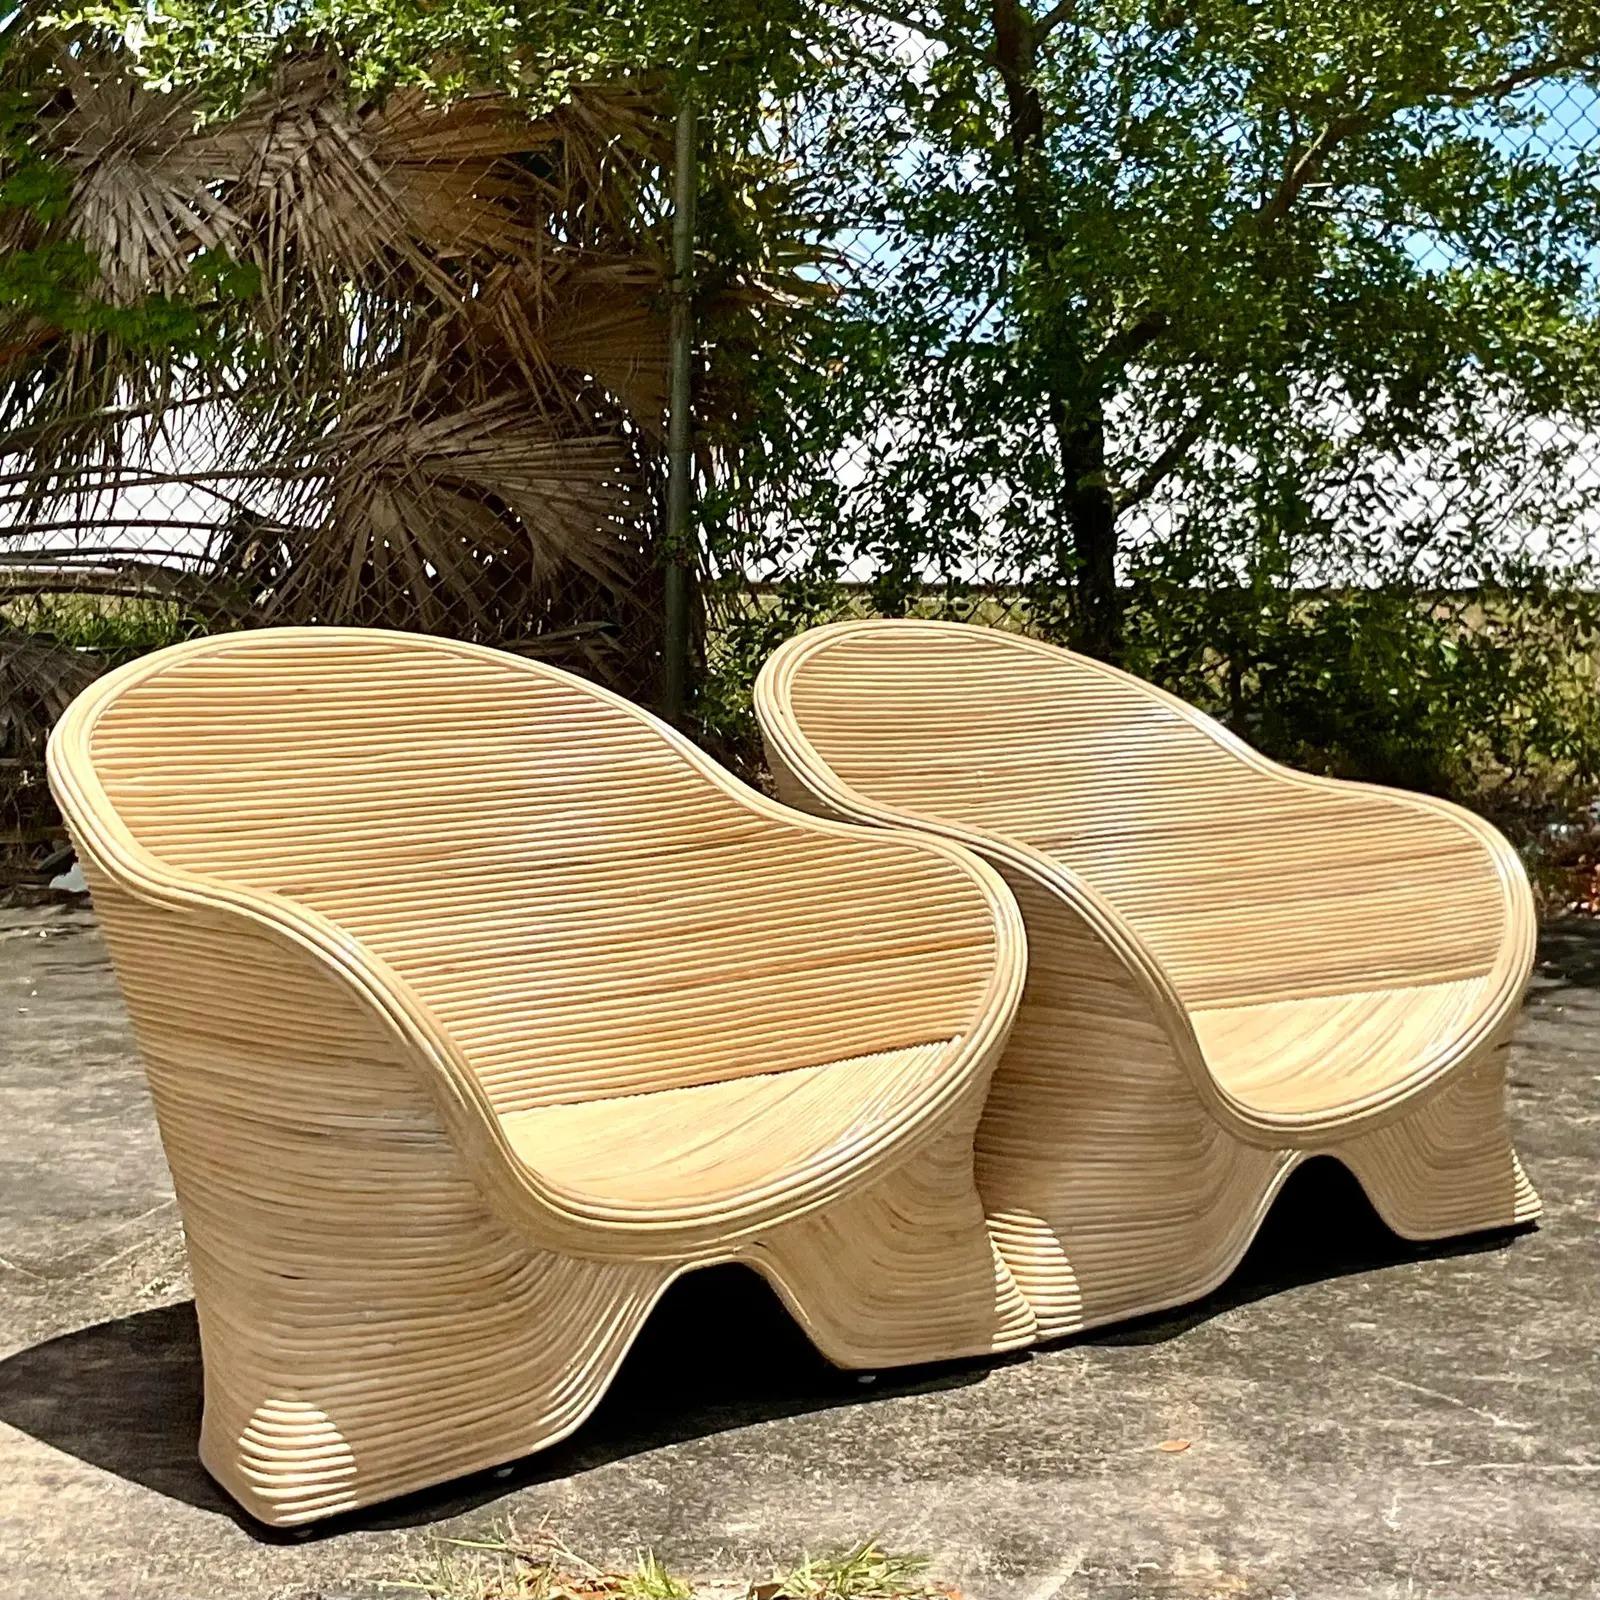 Fantastic pair of Coastal lounge chairs. Low and sexy profile make them a great addition to any décor. Made from a bright pencil reed in an organic shape. Acquired from a Palm Beach estate.